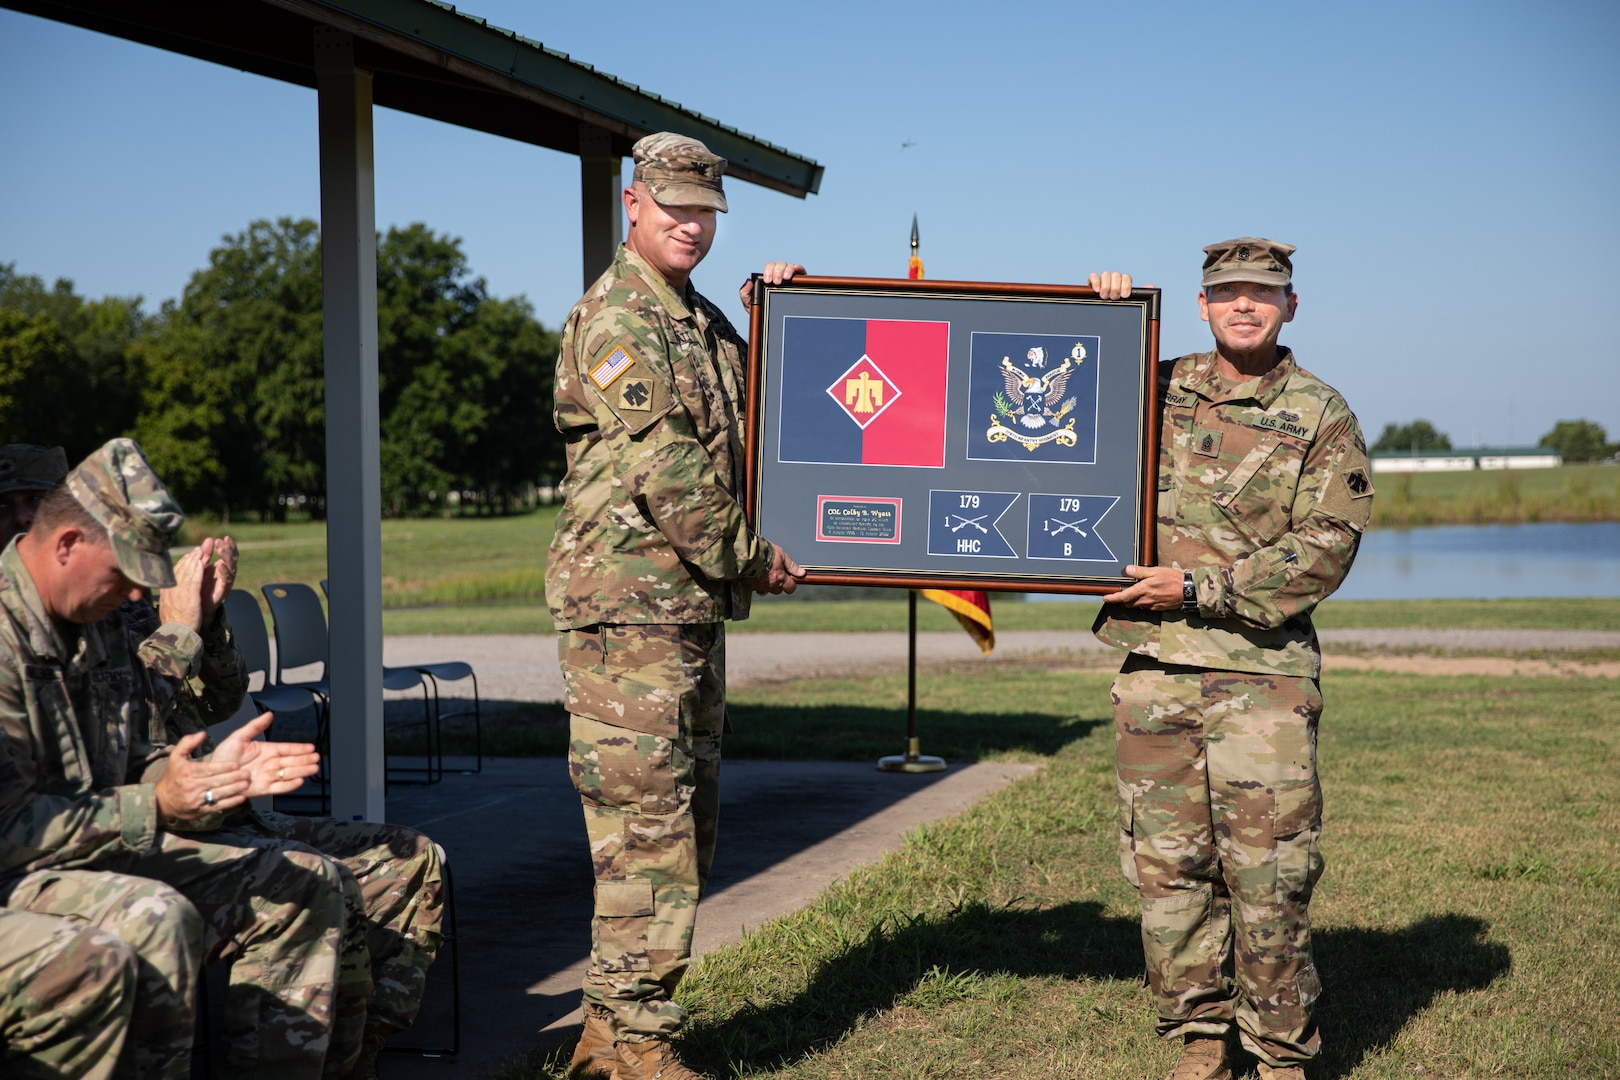 Command Sgt. Maj. Chris Murray presents Col. Colby Wyatt, outgoing commander of the 45th Infantry Brigade Combat Team, Oklahoma National Guard, with the Meritorious Service Medal during a change of command ceremony, Camp Gruber Training Center, Okla., Aug. 14, 2022. Wyatt served as the commander of the 45th IBCT for three years and relinquished command to Col. Andrew Ballenger. (Oklahoma Army National Guard photo by Spc. Danielle Rayon)